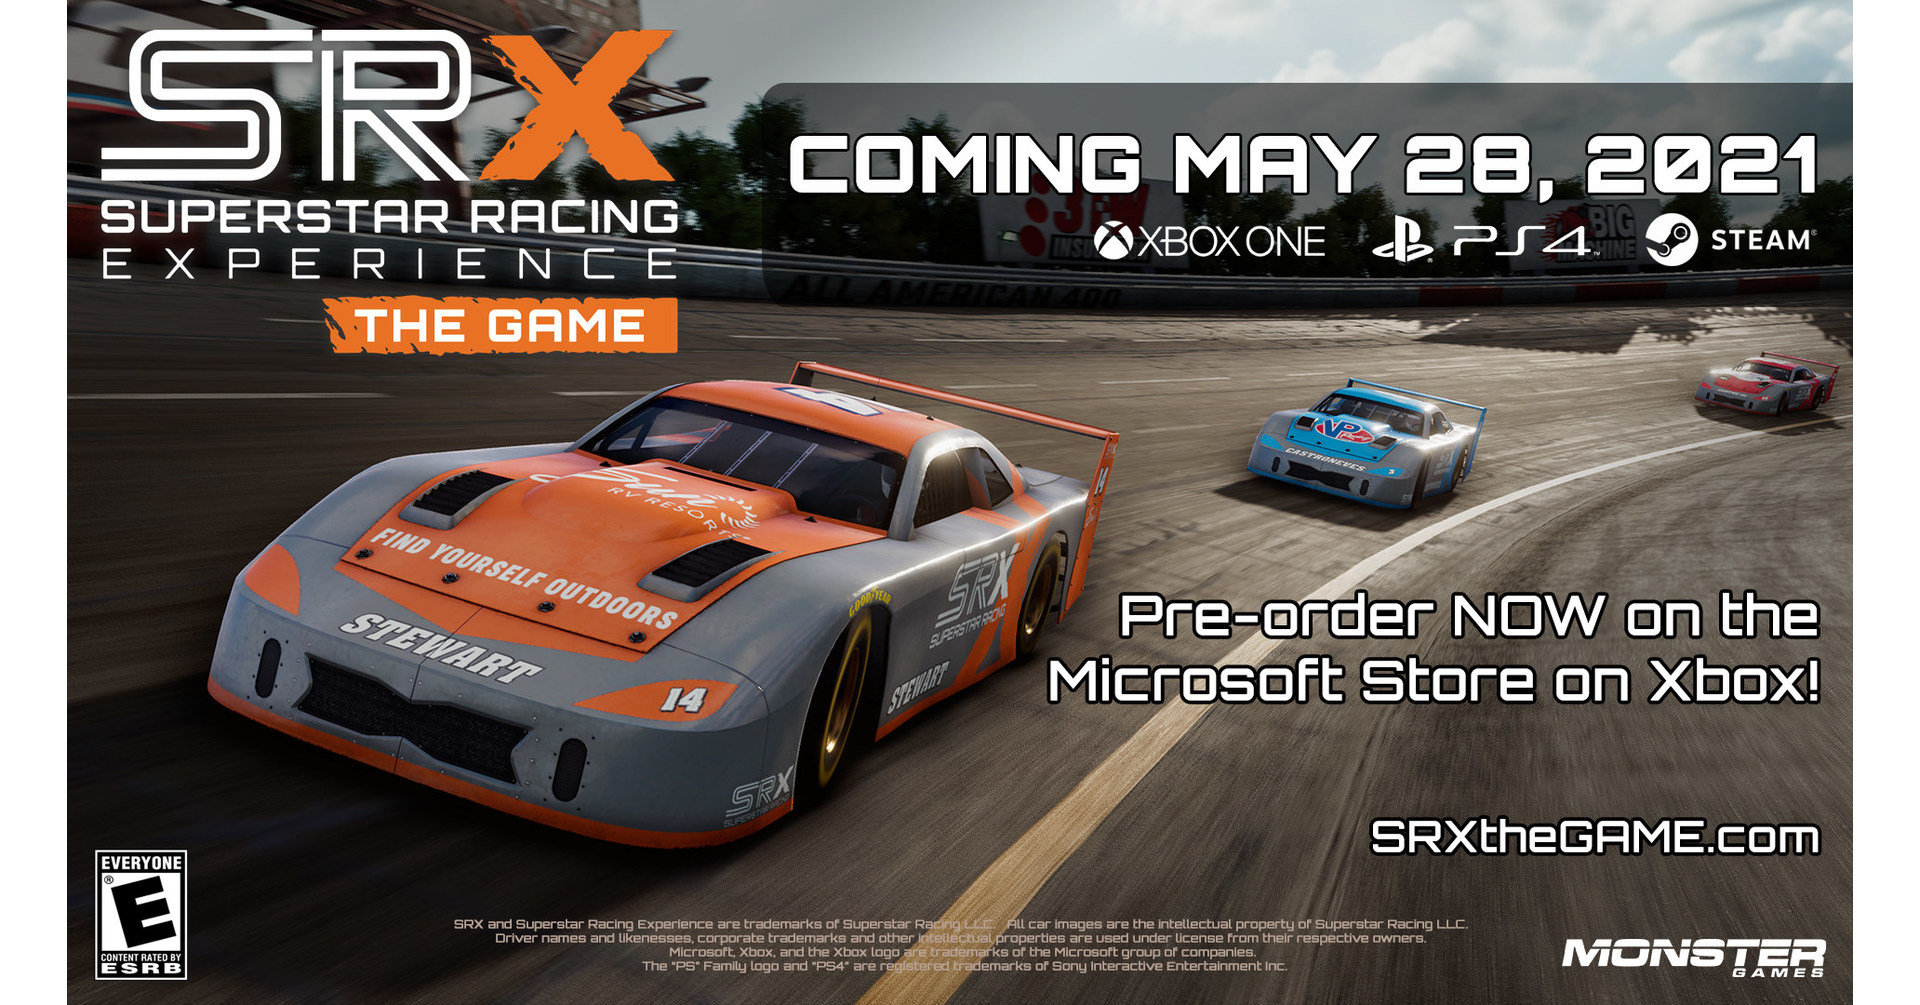 Superstar Racing Experience Takes The Green Flag With A New Racing Game